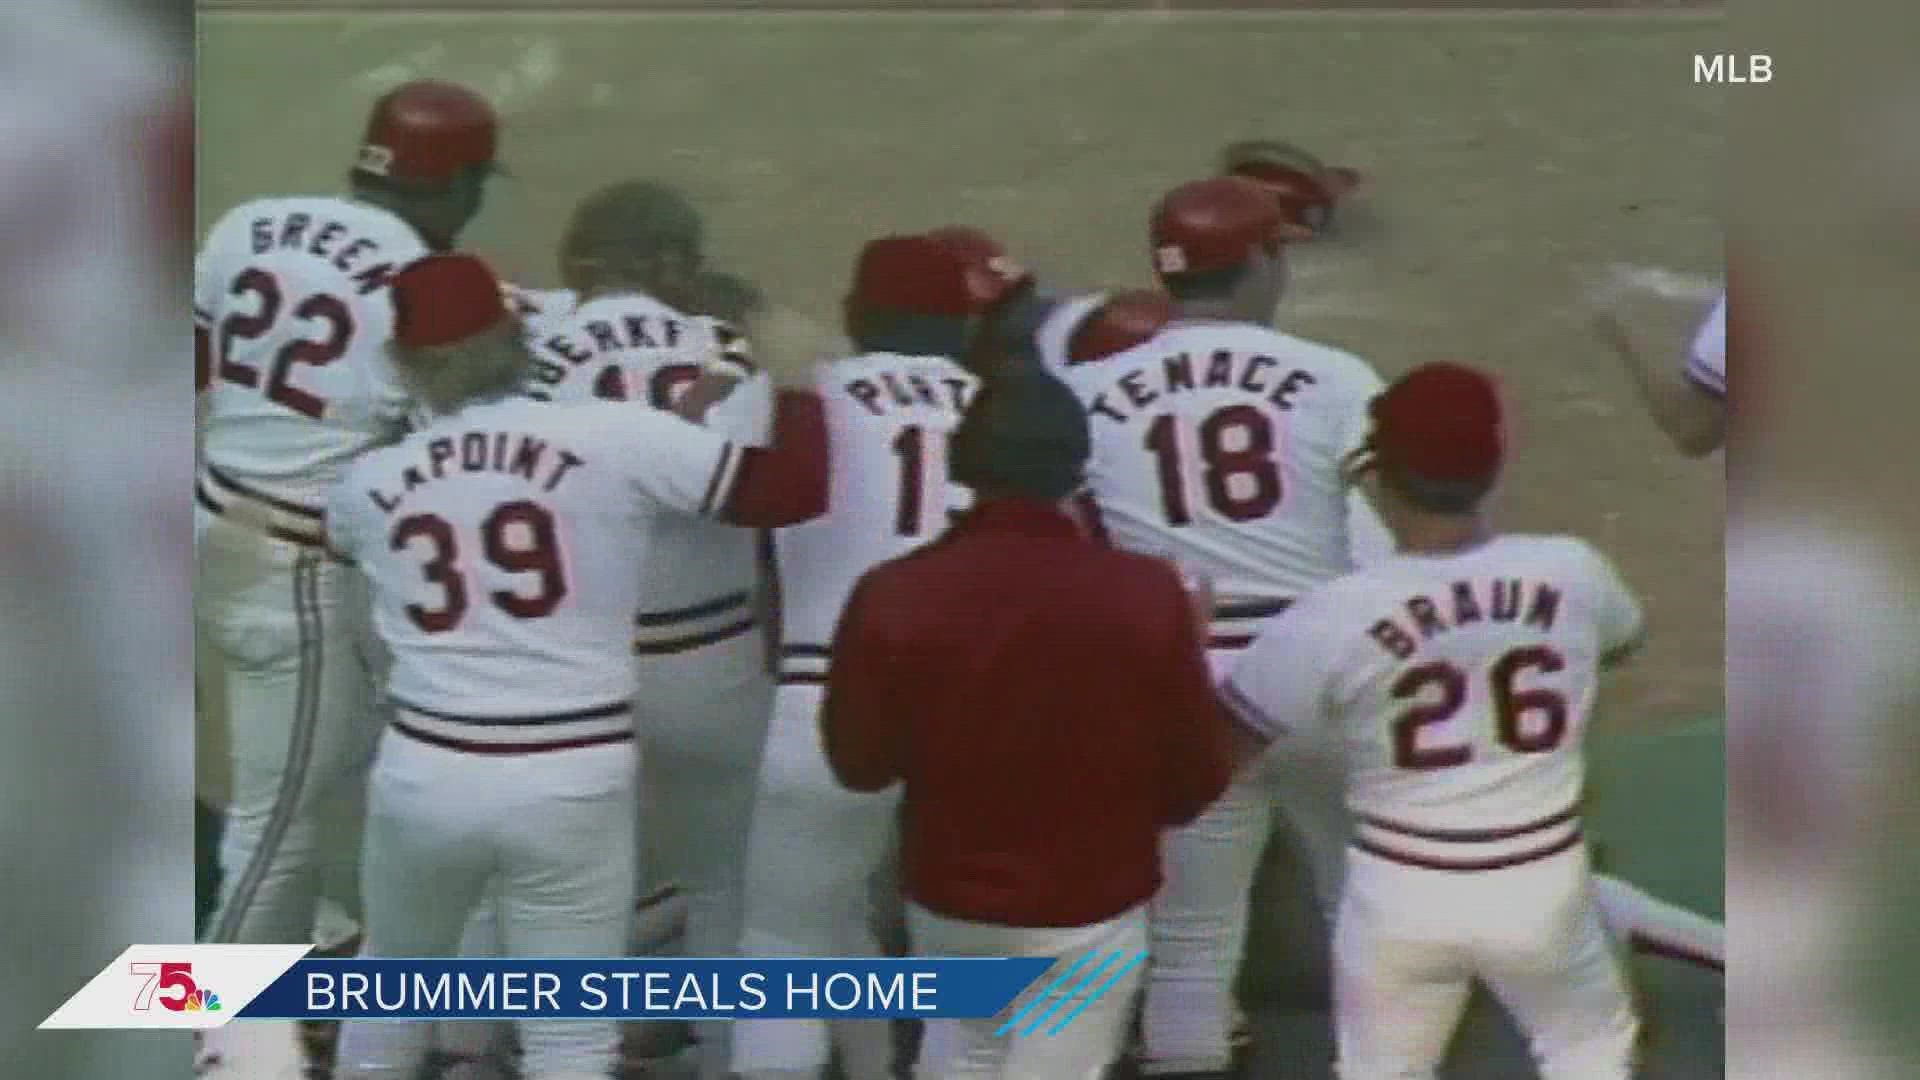 On Aug. 22, 1982, third-string catcher Glenn Brummer stole home, and stole a place in Cardinals history. 40 years later, he remembers it like it was yesterday.